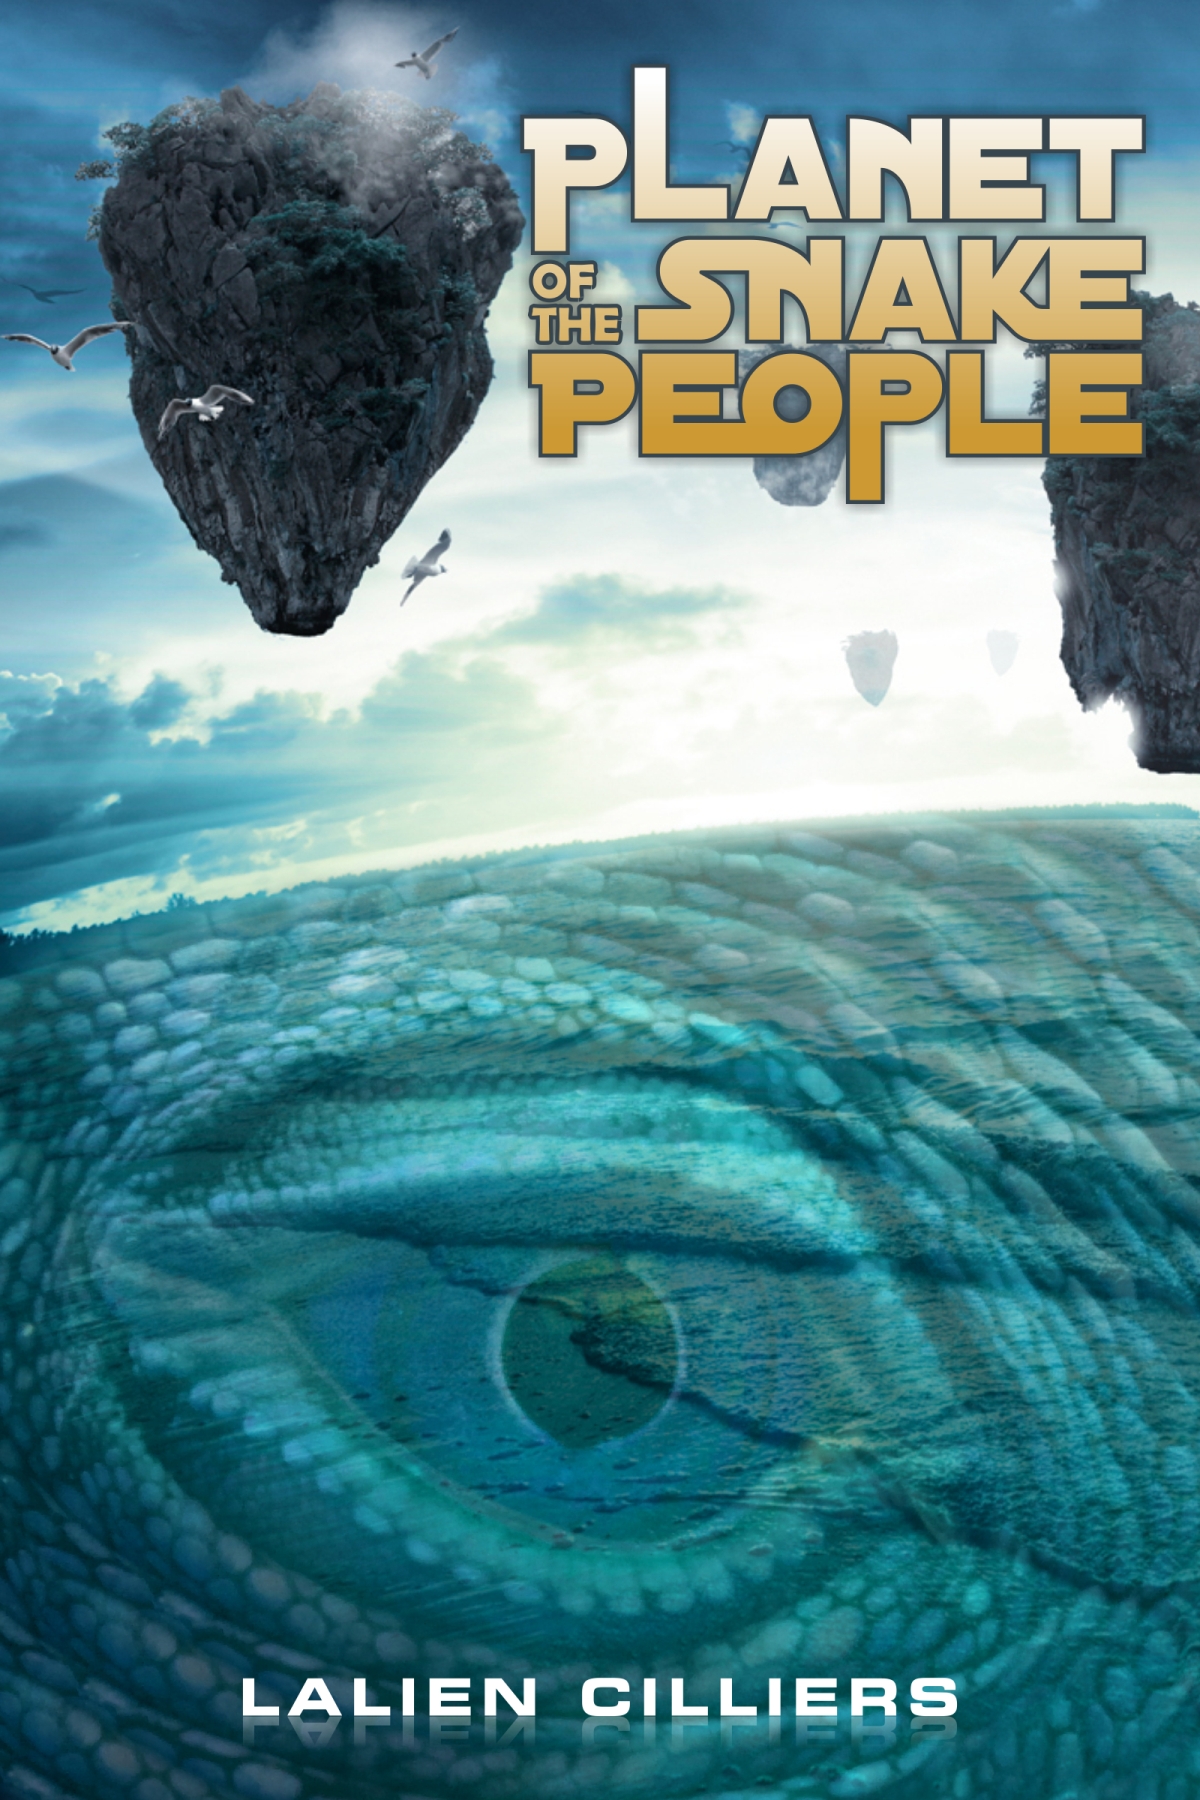 Amazon KDP: The Planet of the Snake People